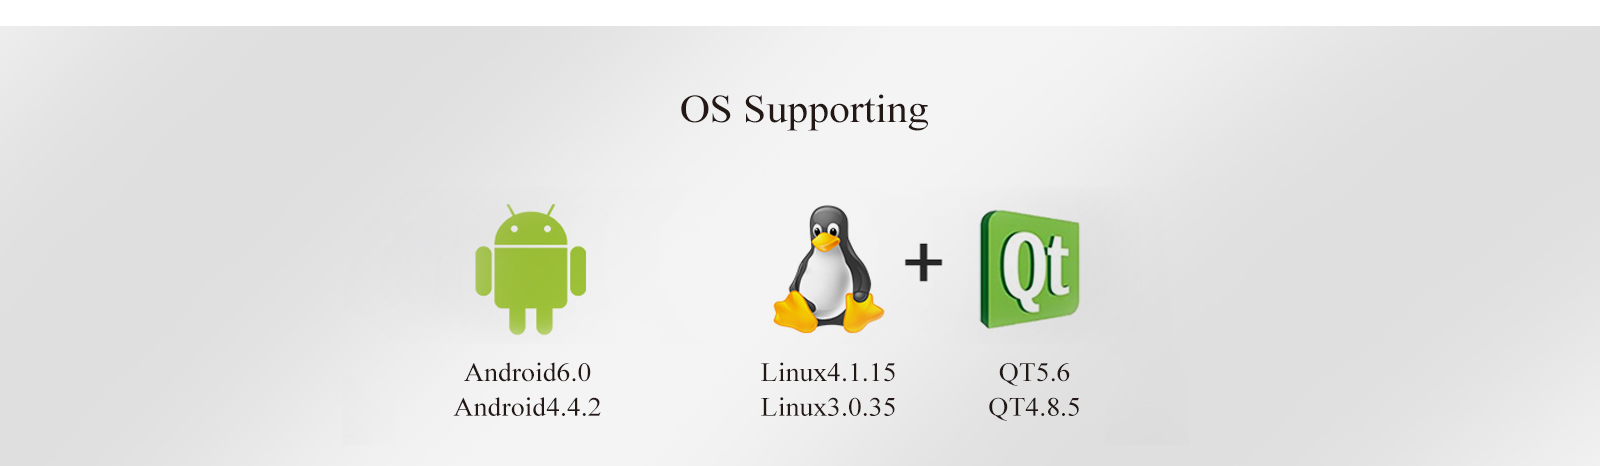 OS supporting